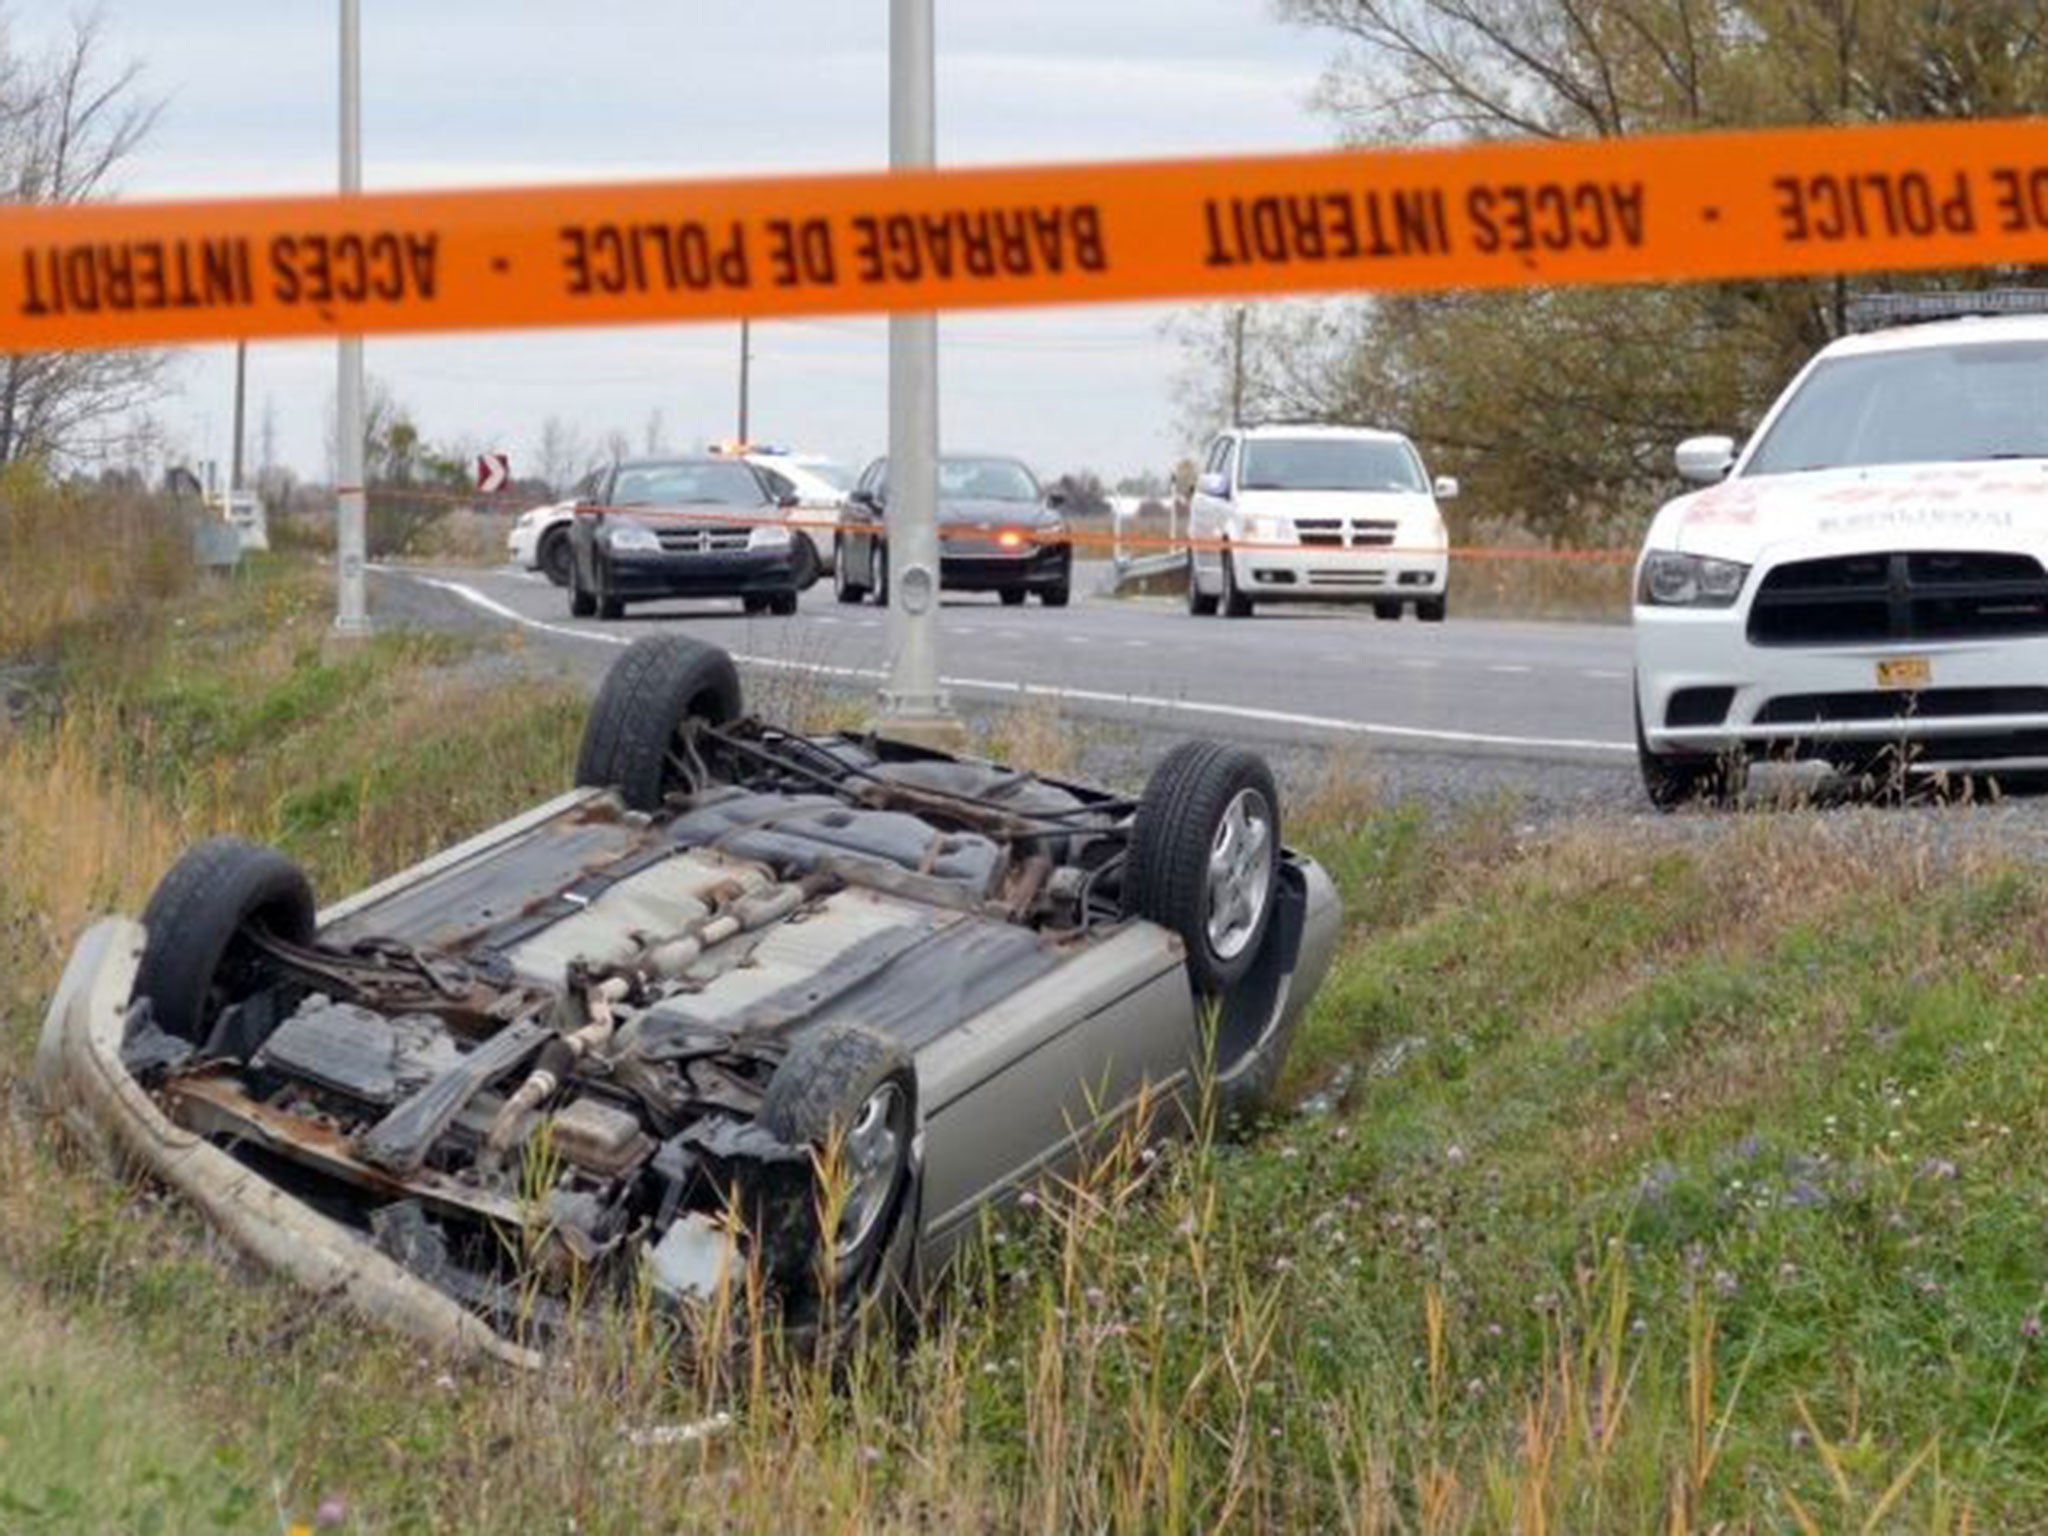 A car is overturned in the ditch in a cordoned off area in St-Jean-sur-Richelieu, Quebec on Monday Oct. 20, 2014.